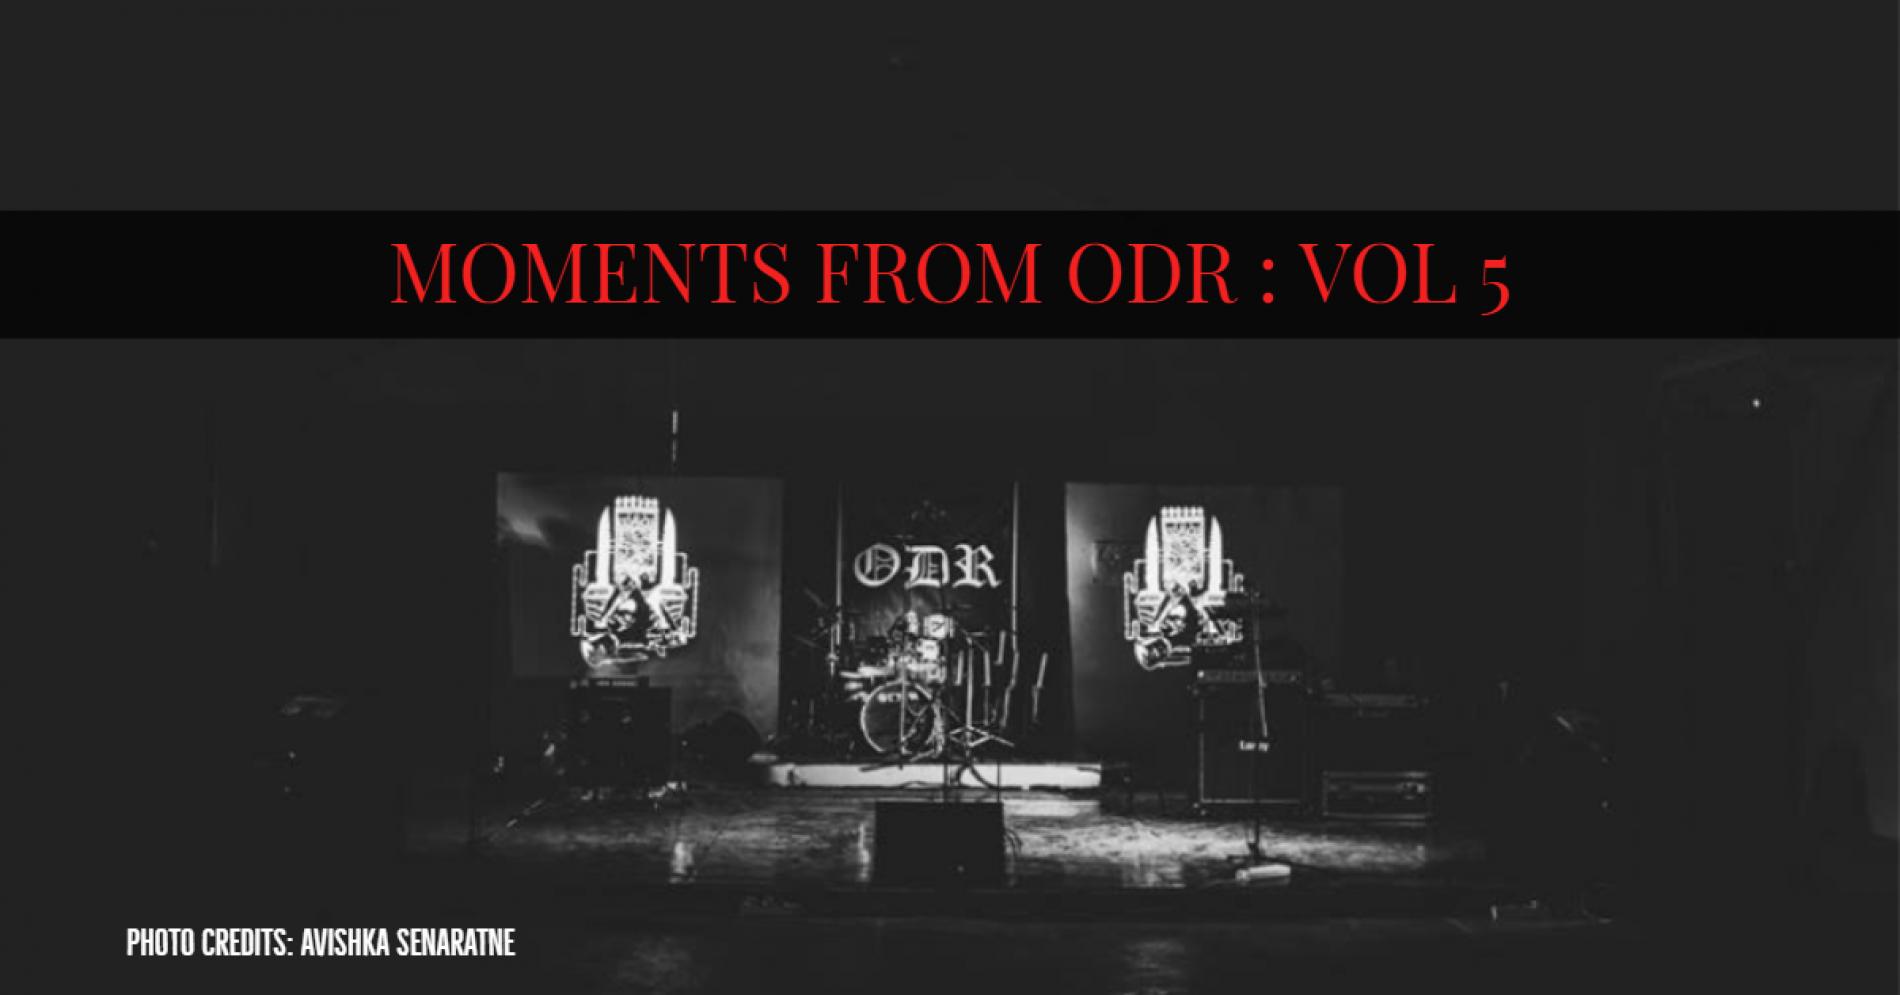 Moments From ODR : Vol 5